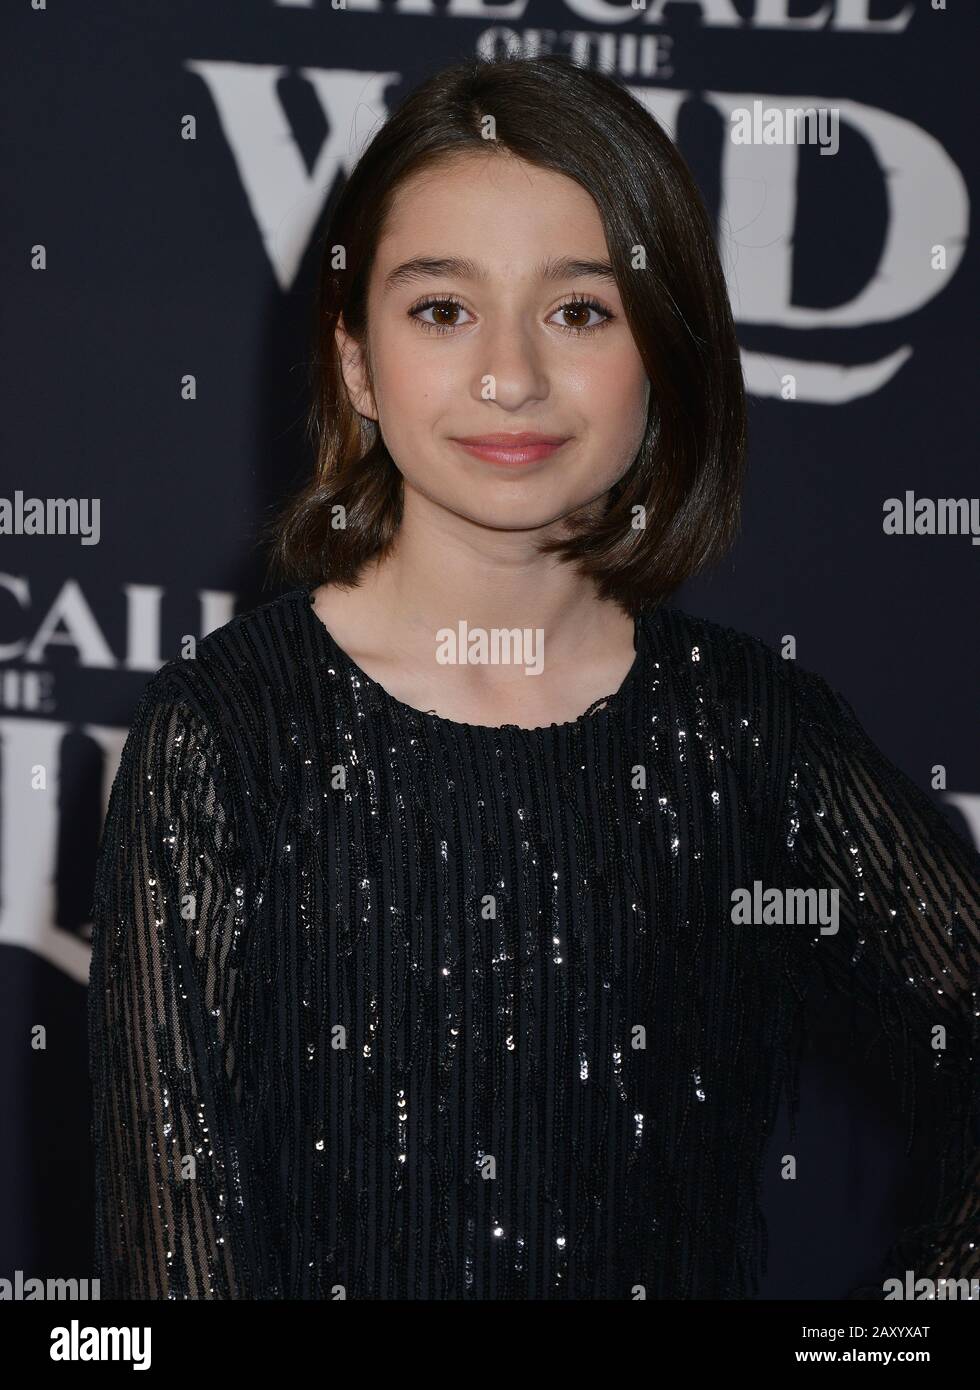 Los Angeles, USA. 13th Feb, 2020. Stella Edwards 046 attends the Premiere of 20th Century Studios' 'The Call of the Wild' at El Capitan Theatre on February 13, 2020 in Los Angeles, California. Credit: Tsuni/USA/Alamy Live News Stock Photo